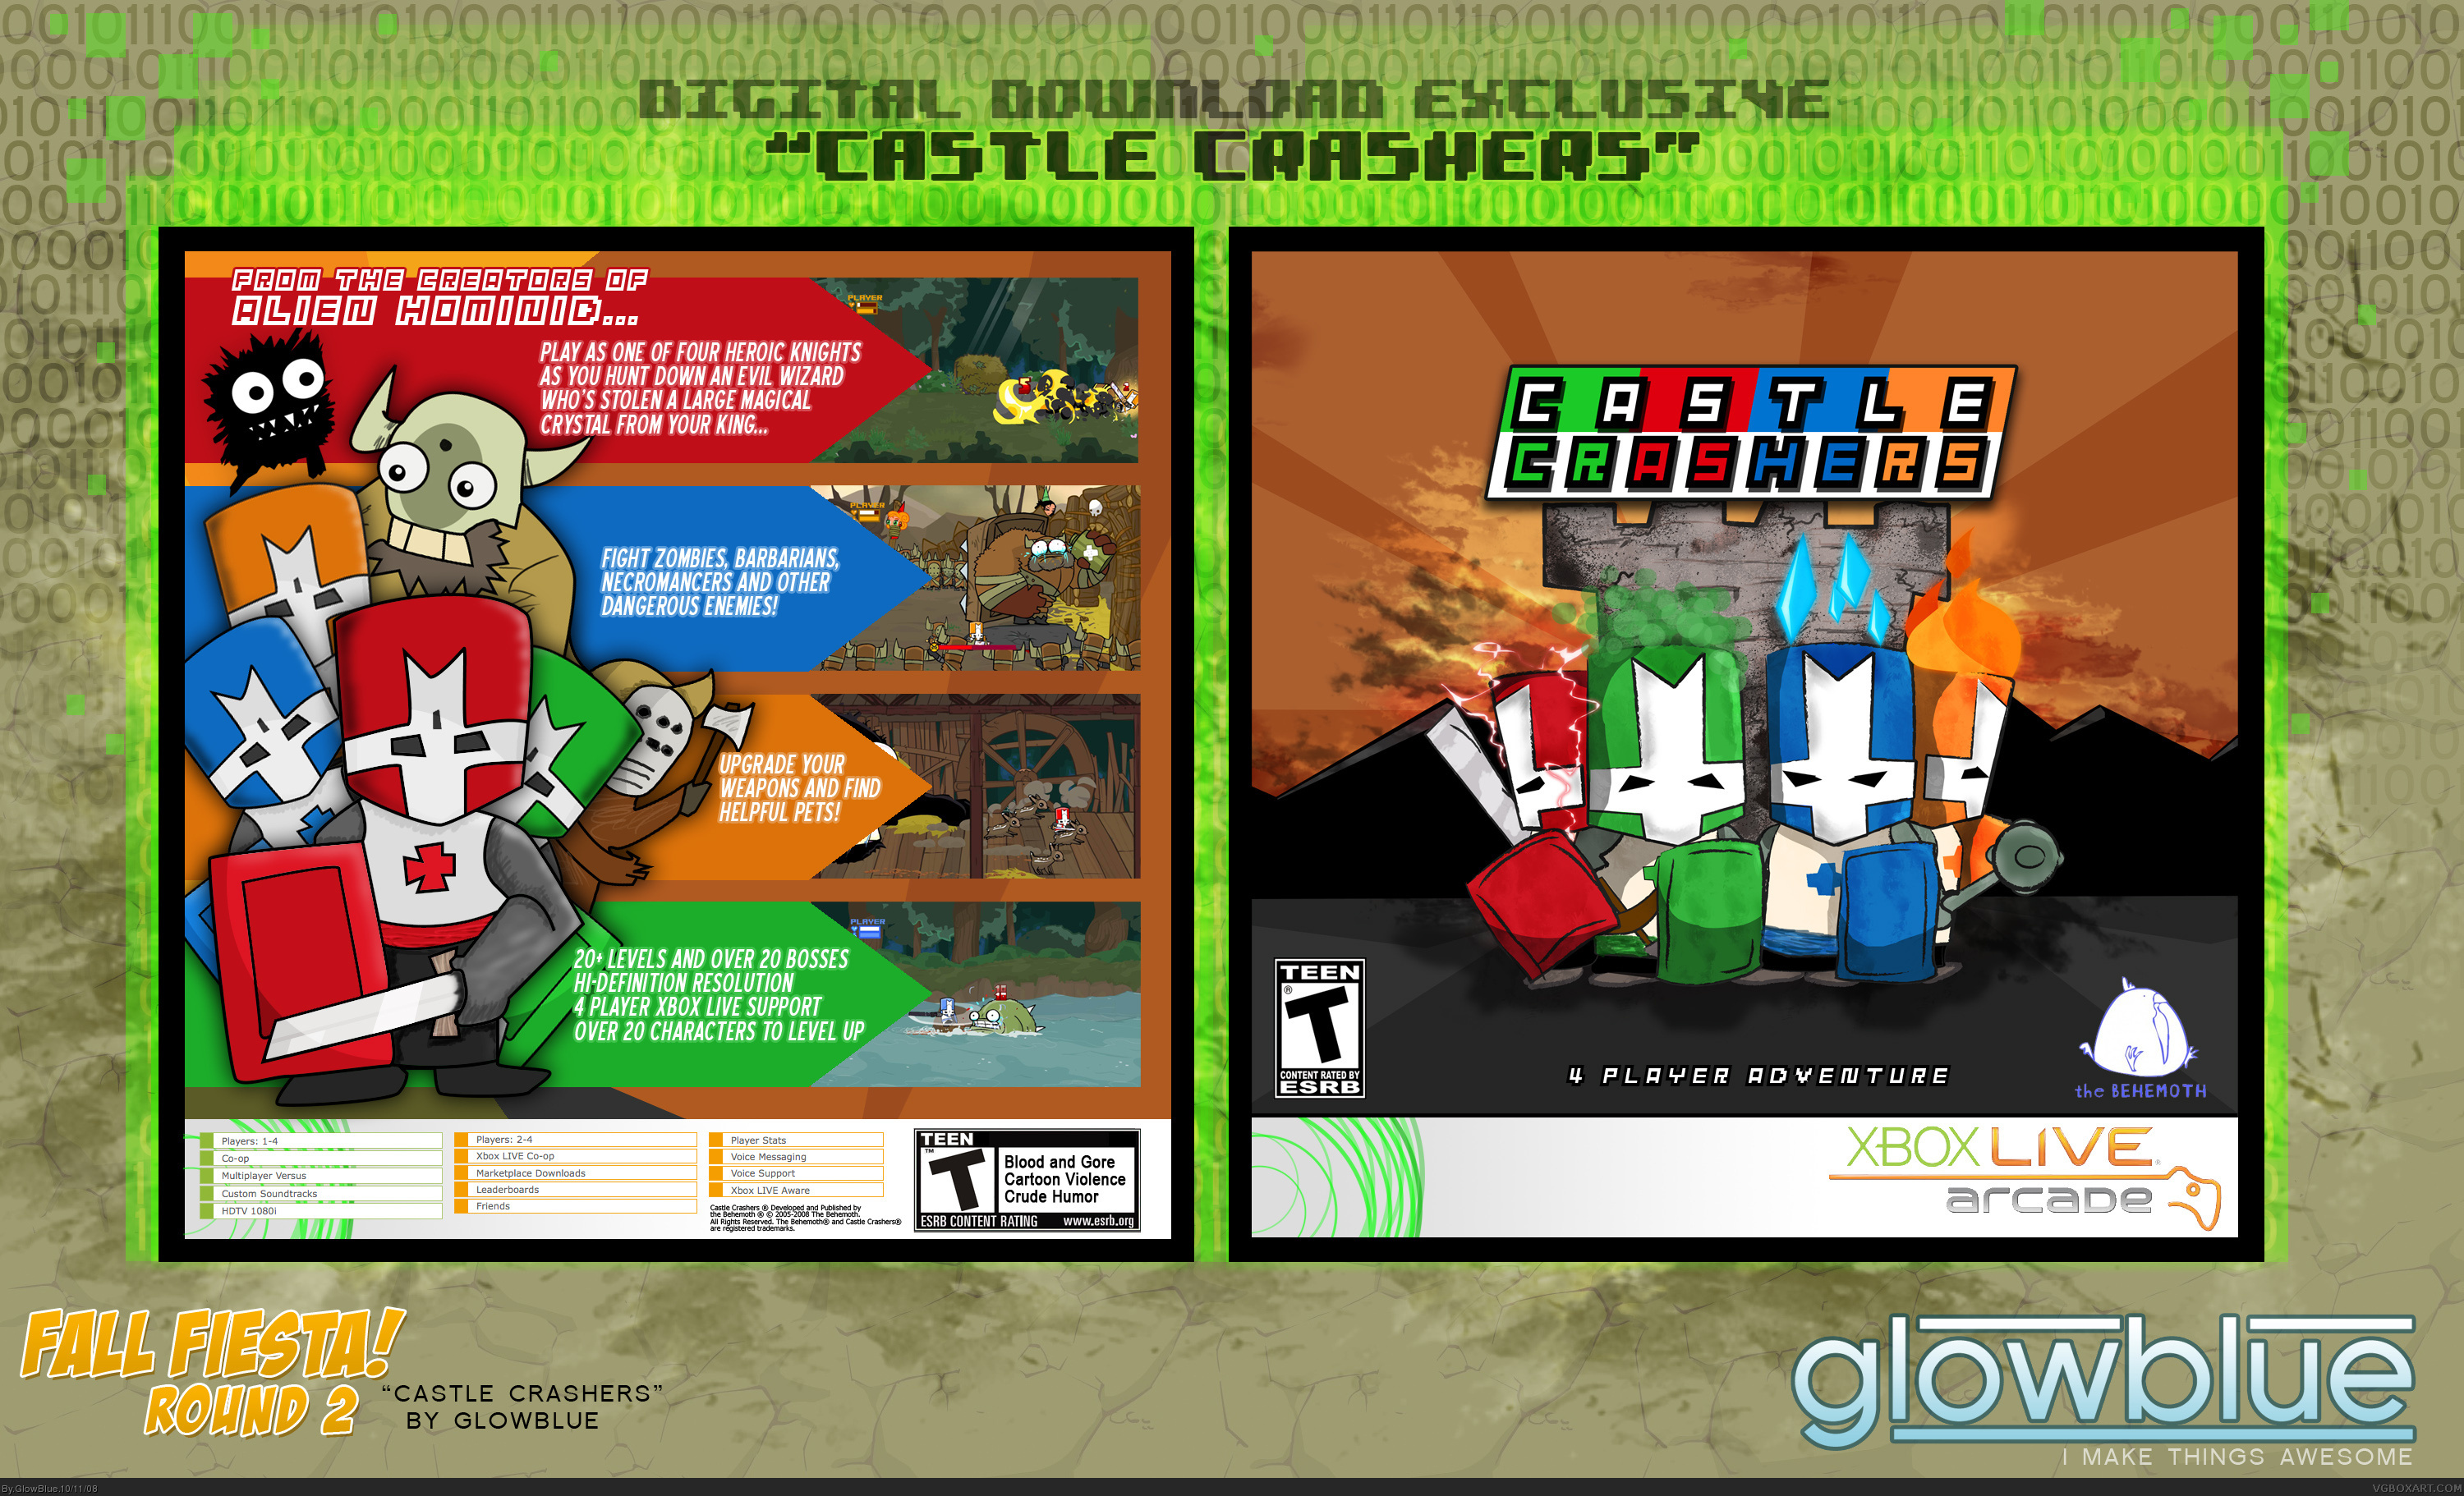 Viewing full size Castle Crashers box cover.